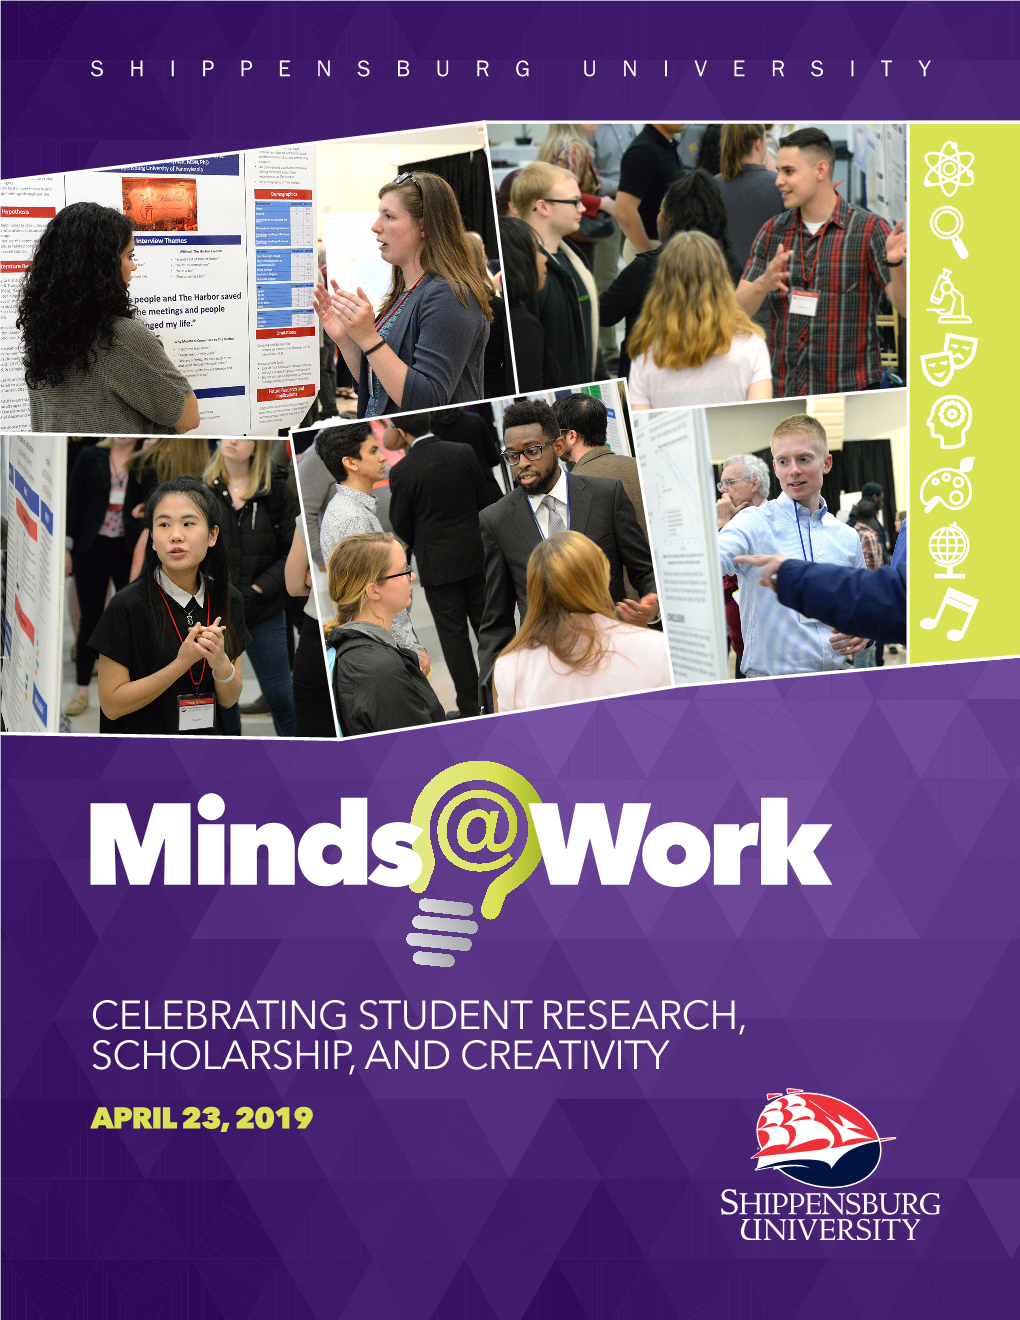 Celebrating Student Research, Scholarship, and Creativity April 23, 2019 Annual Kirkland/Spizuoco Memorial Science Lecture Dr